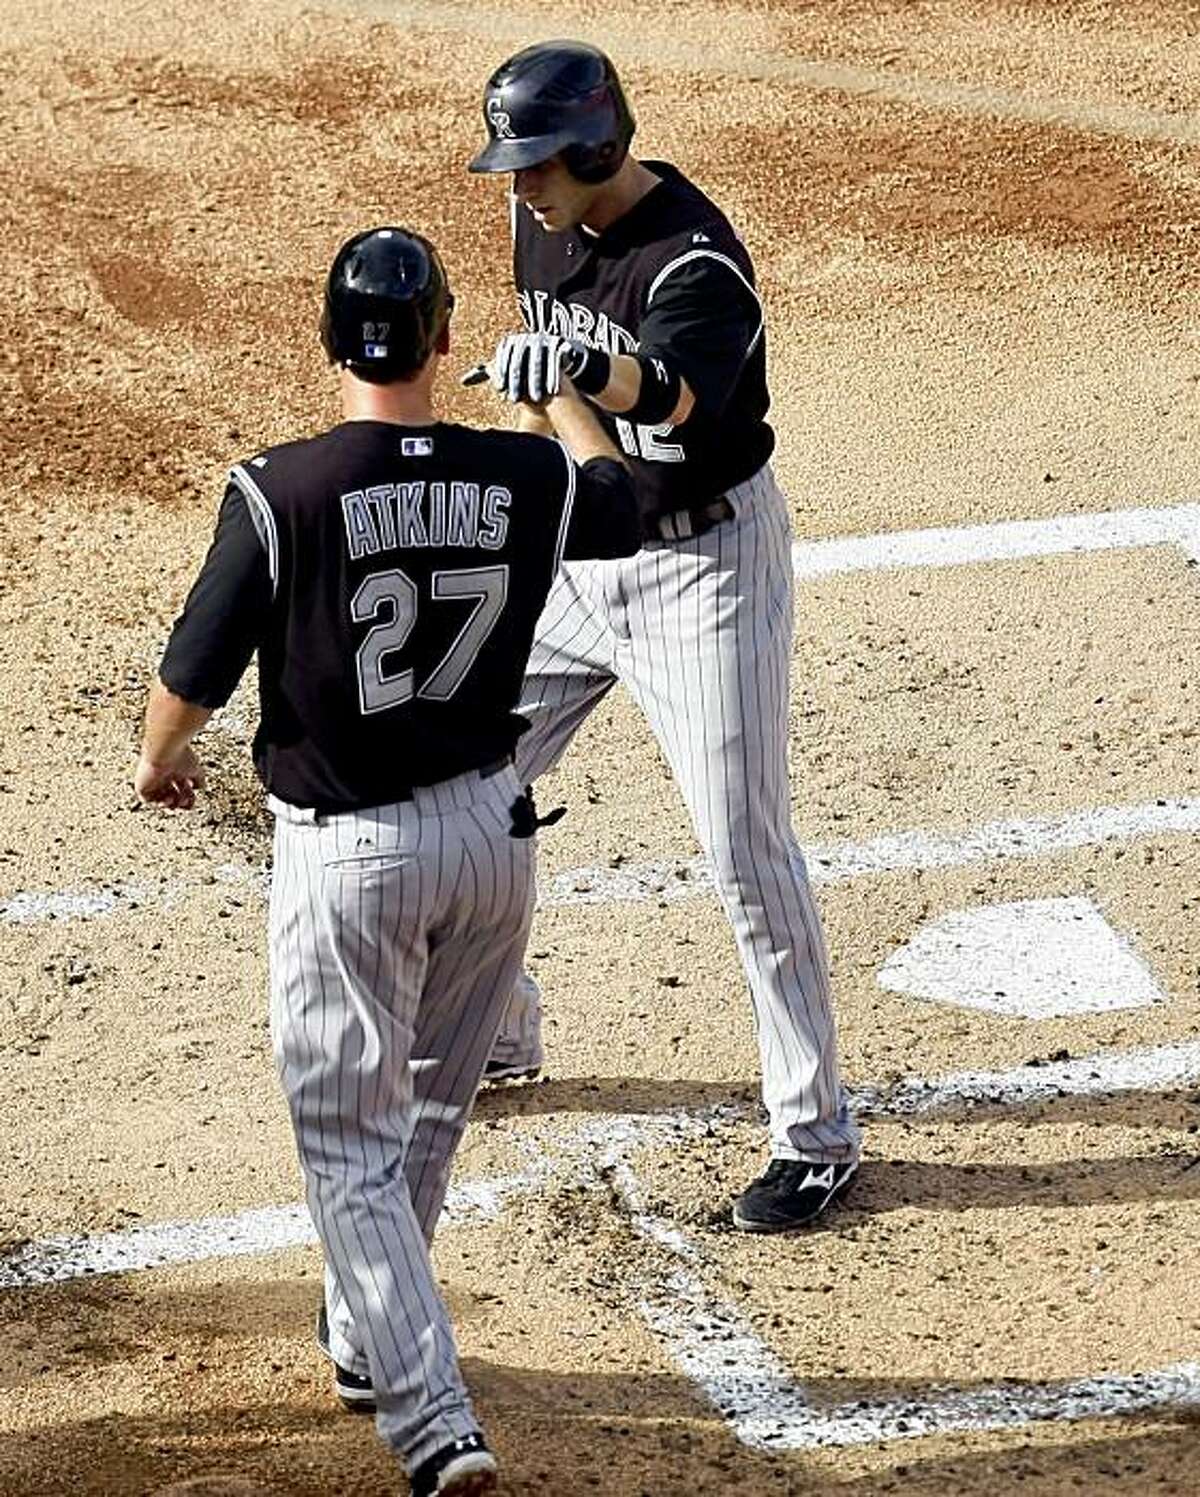 Colorado Rockies' Garrett Atkins (27) and Clint Barmes (12) celebrate Barmes' two-run home run in the second inning of Game 2 of a baseball doubleheader against the Florida Marlins on Sunday, Aug. 16, 2009, in Miami. (AP Photo/J Pat Carter)